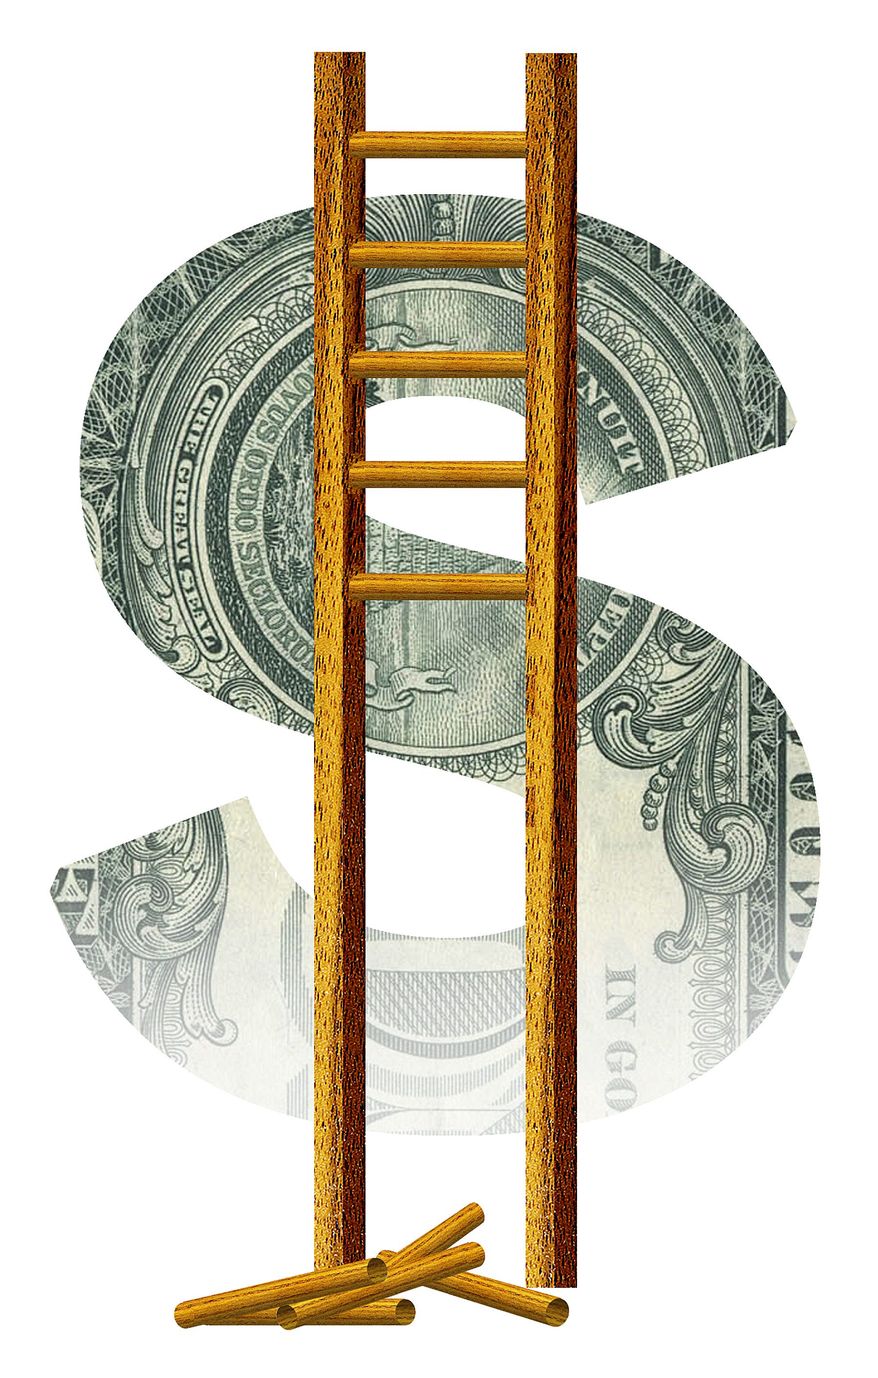 Illustration on the negative effects of raising the minimum wage by Alexander Hunter/The Washington Times